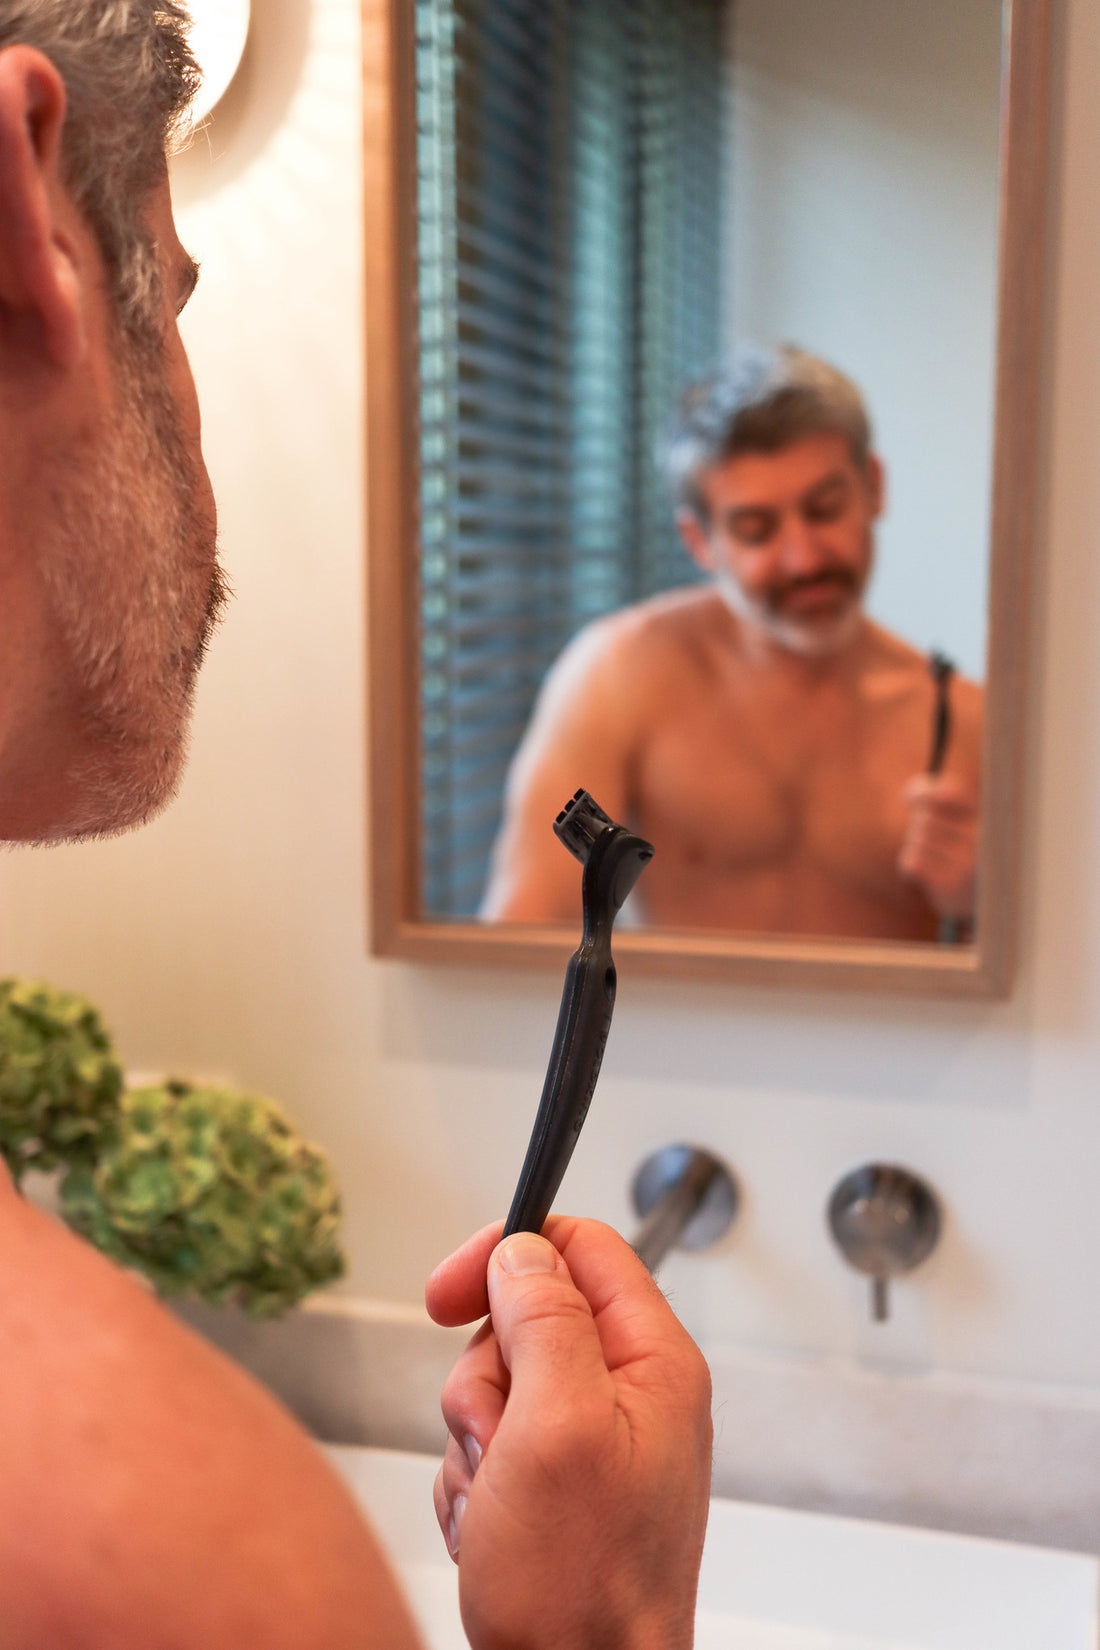 A COMPLETE GUIDE ON USING THE BEST BALL SHAVER OF ALL TIME: THE RAZOR